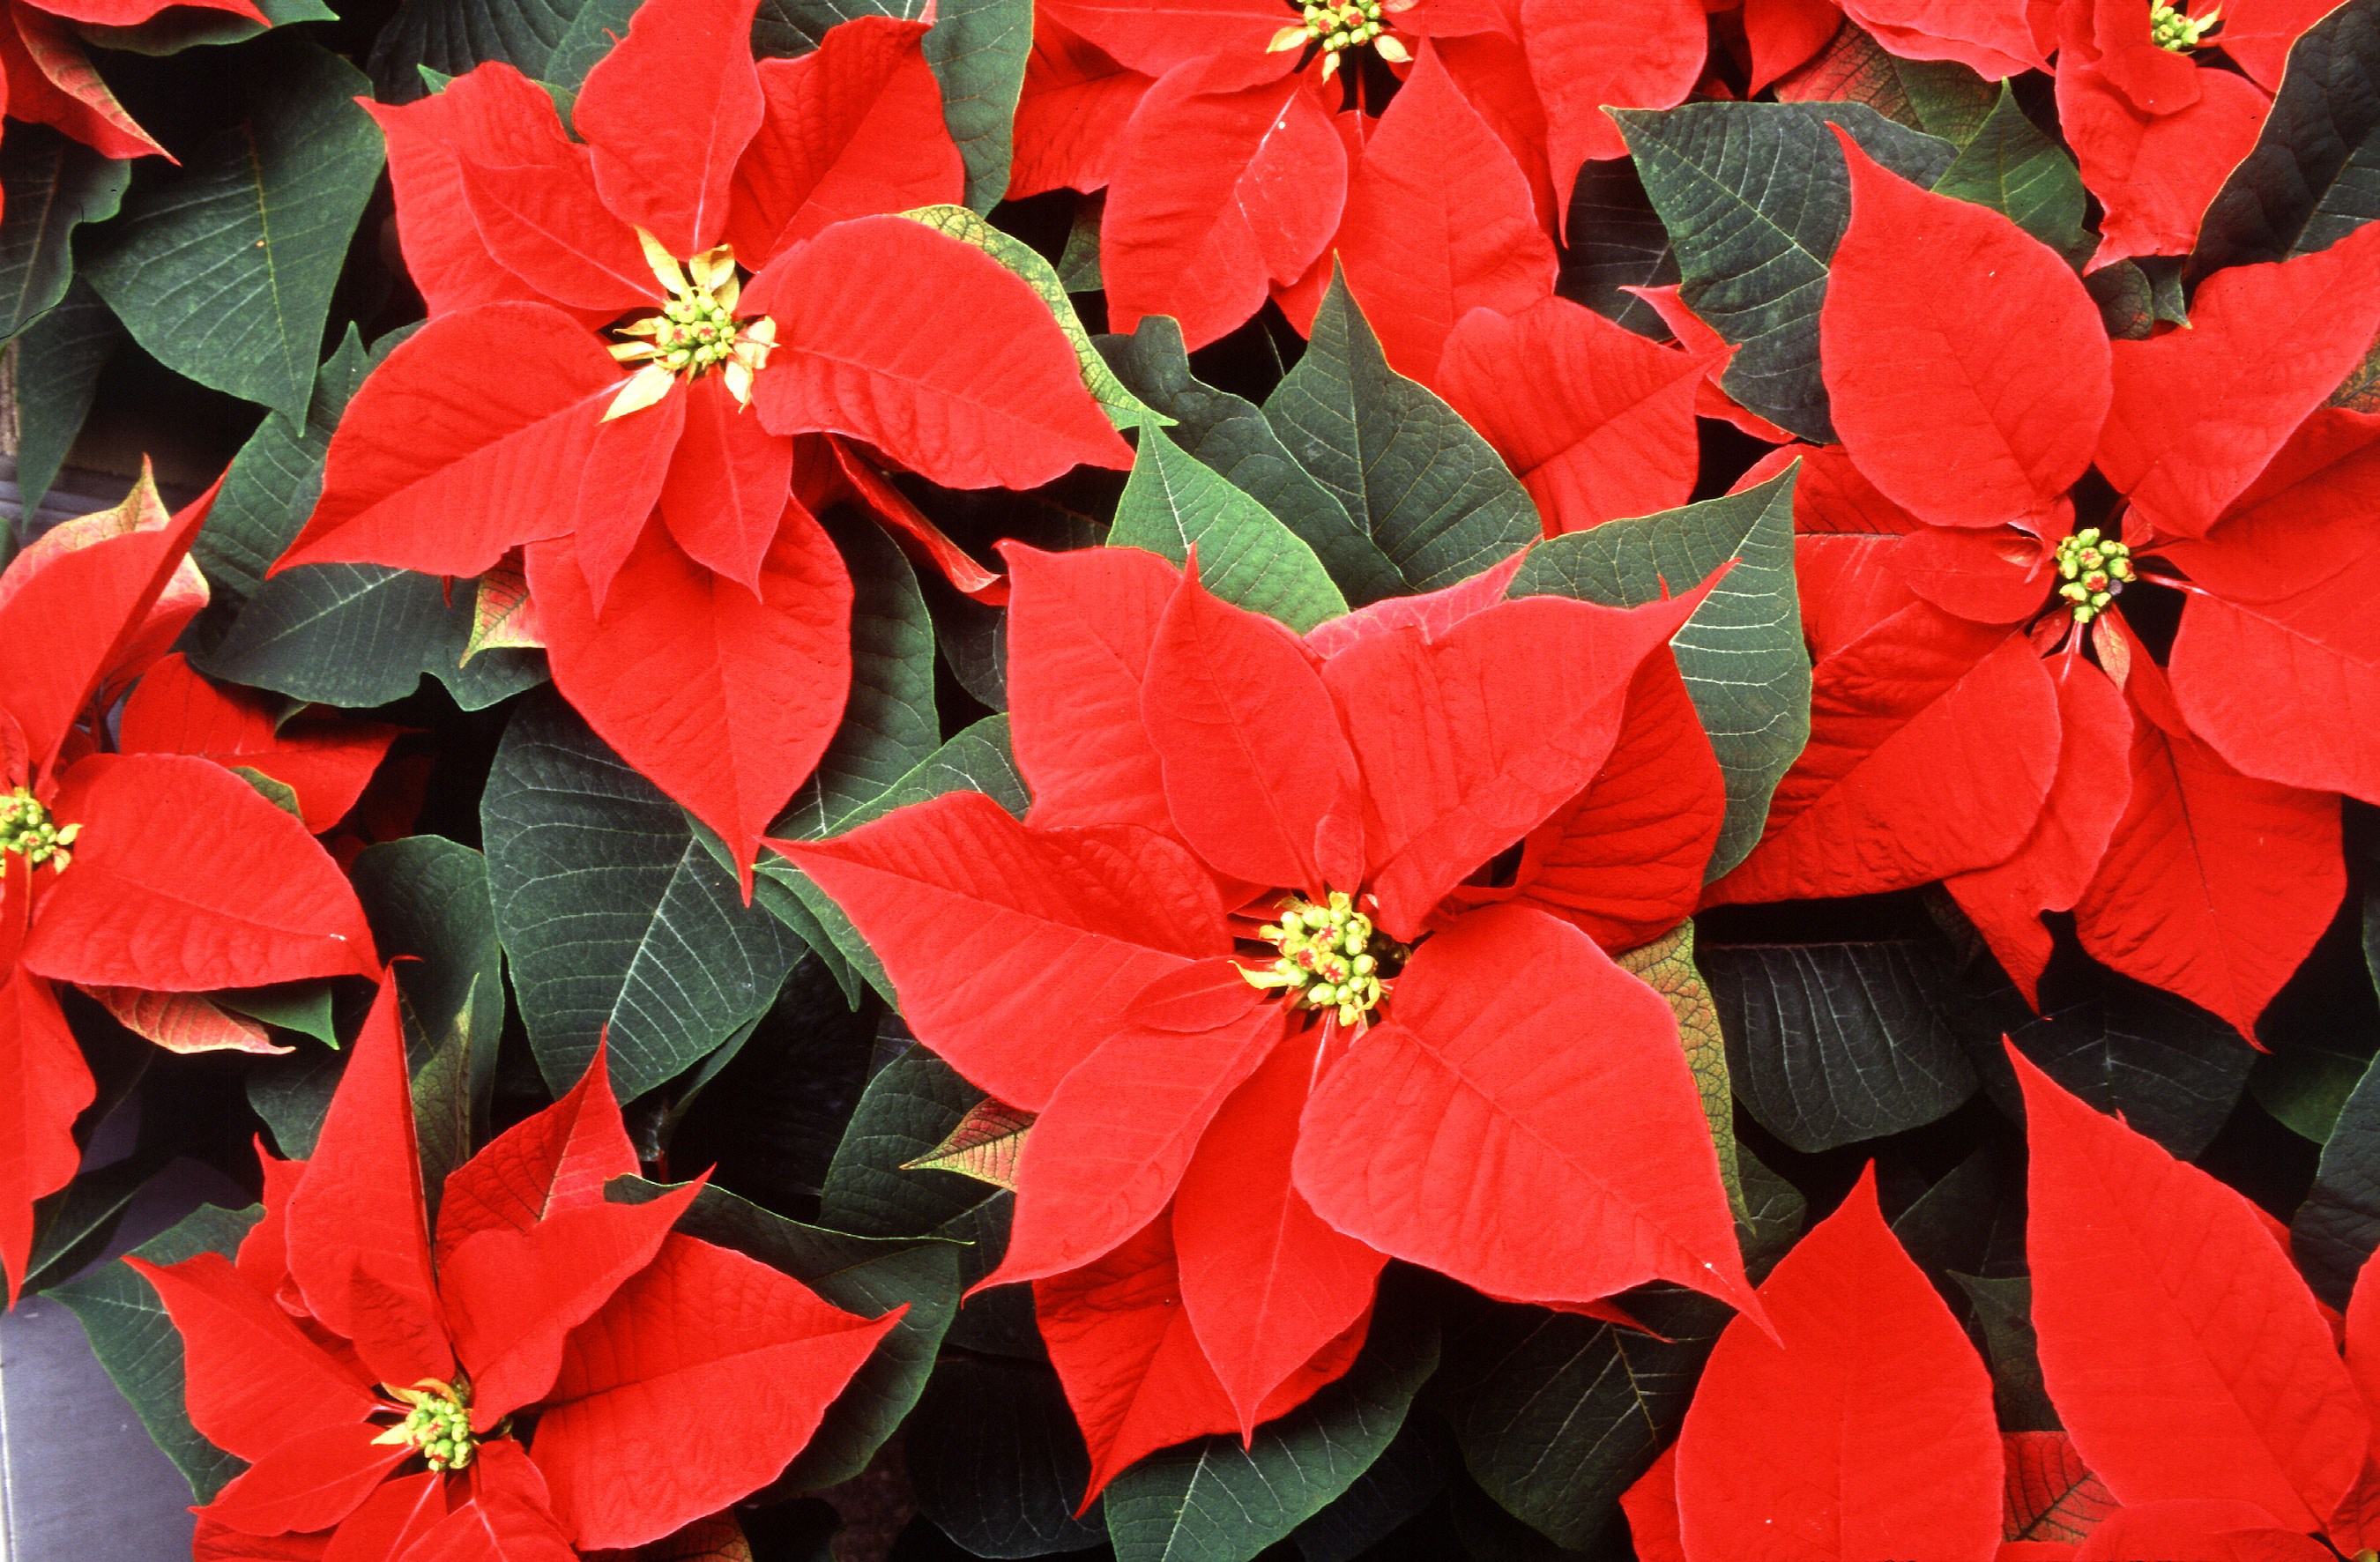 Open The poinsettia's small flowers are surrounded by colorful leaves called bracts. Photo by Scott Bauer, USDA Agricultural Research Service.